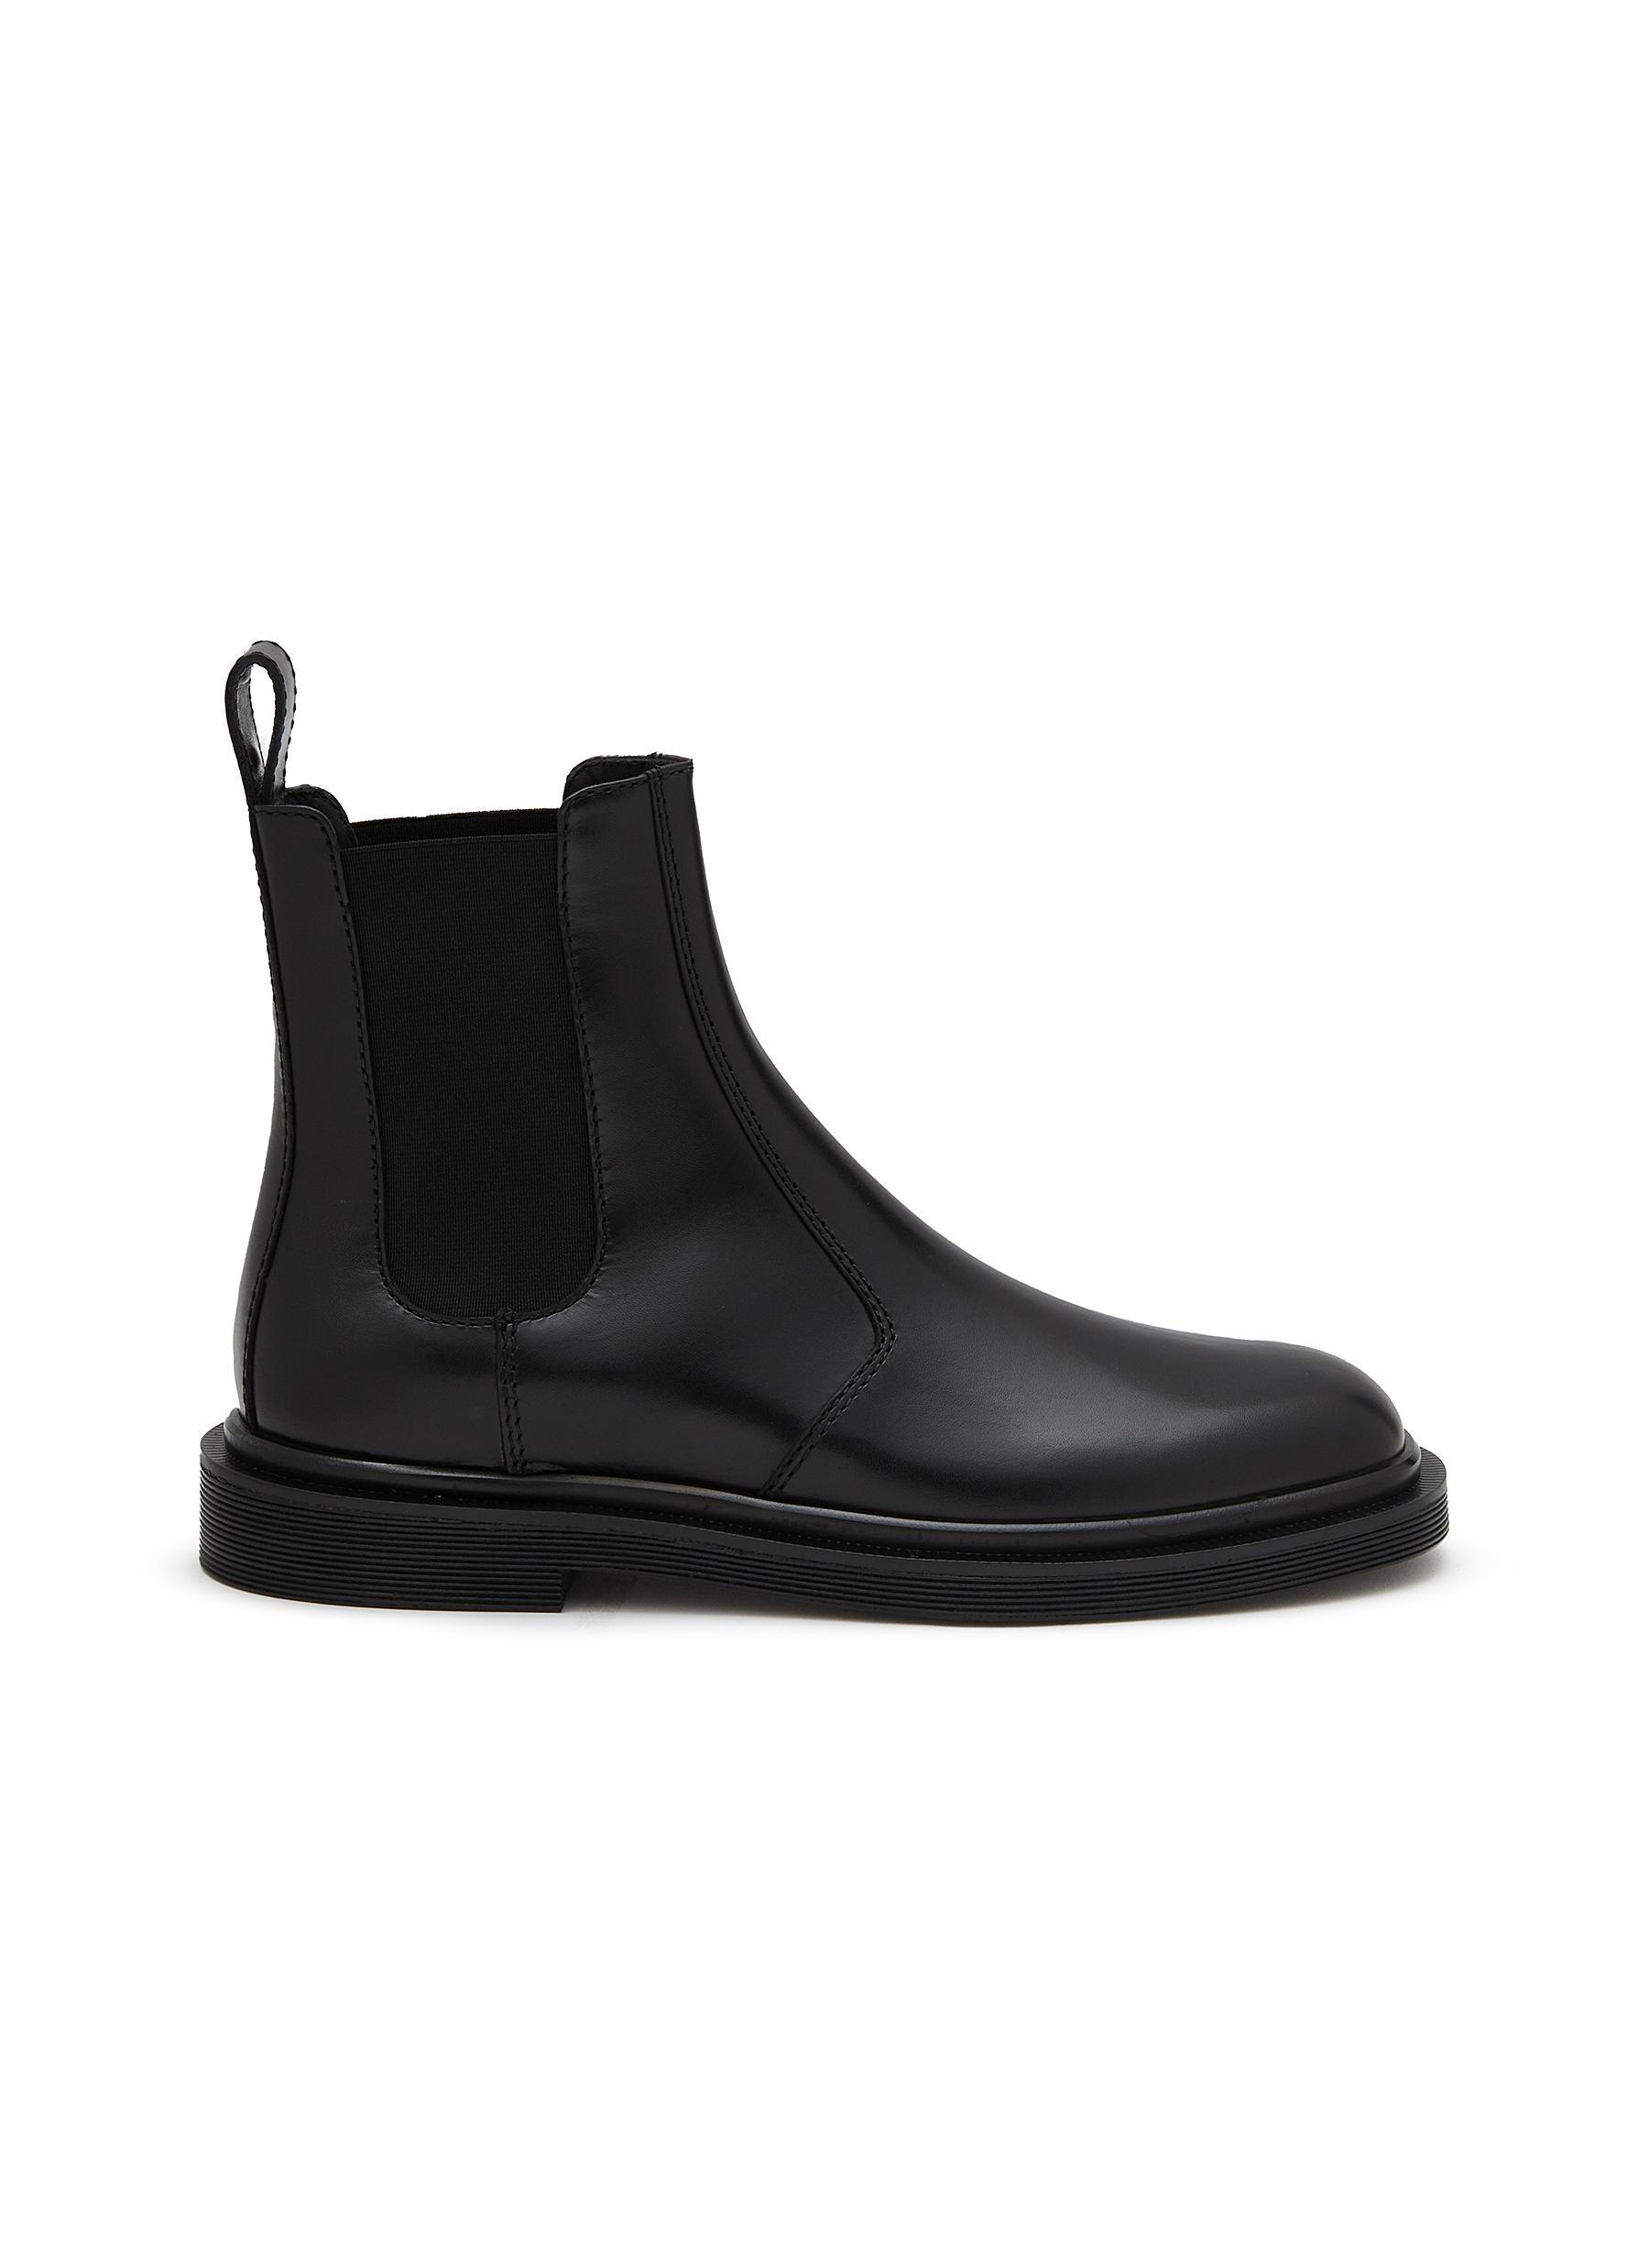 Ranger patent leather ankle boots